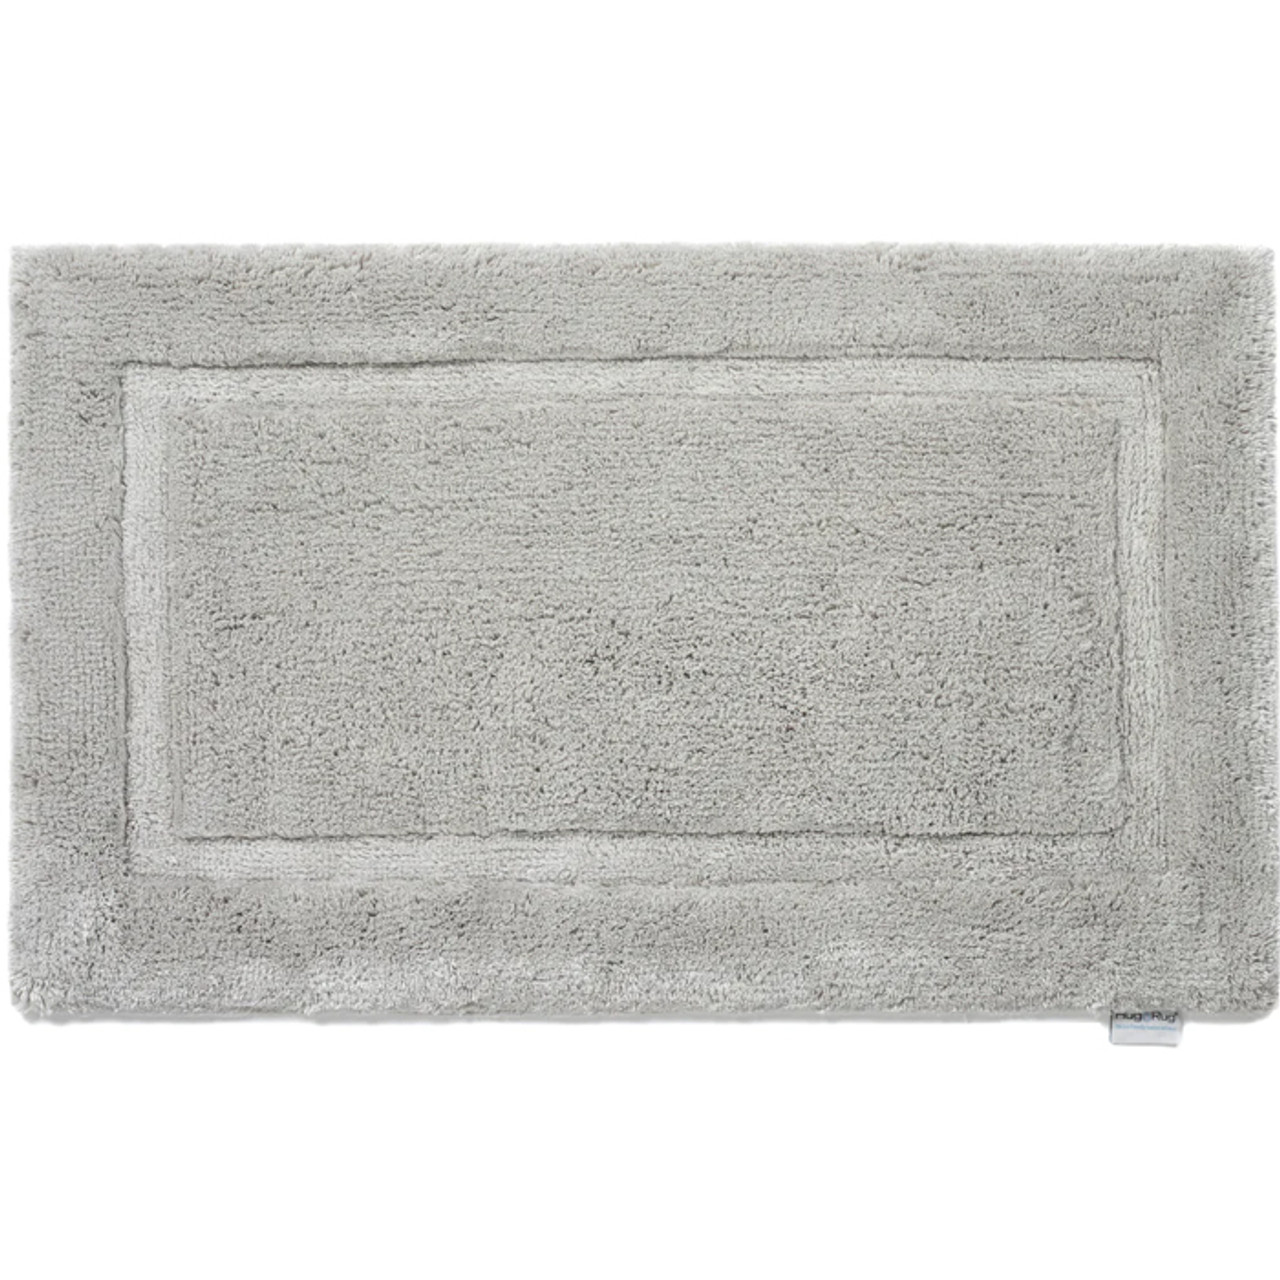 Bamboo Border - Grey 50x80cm *in-store